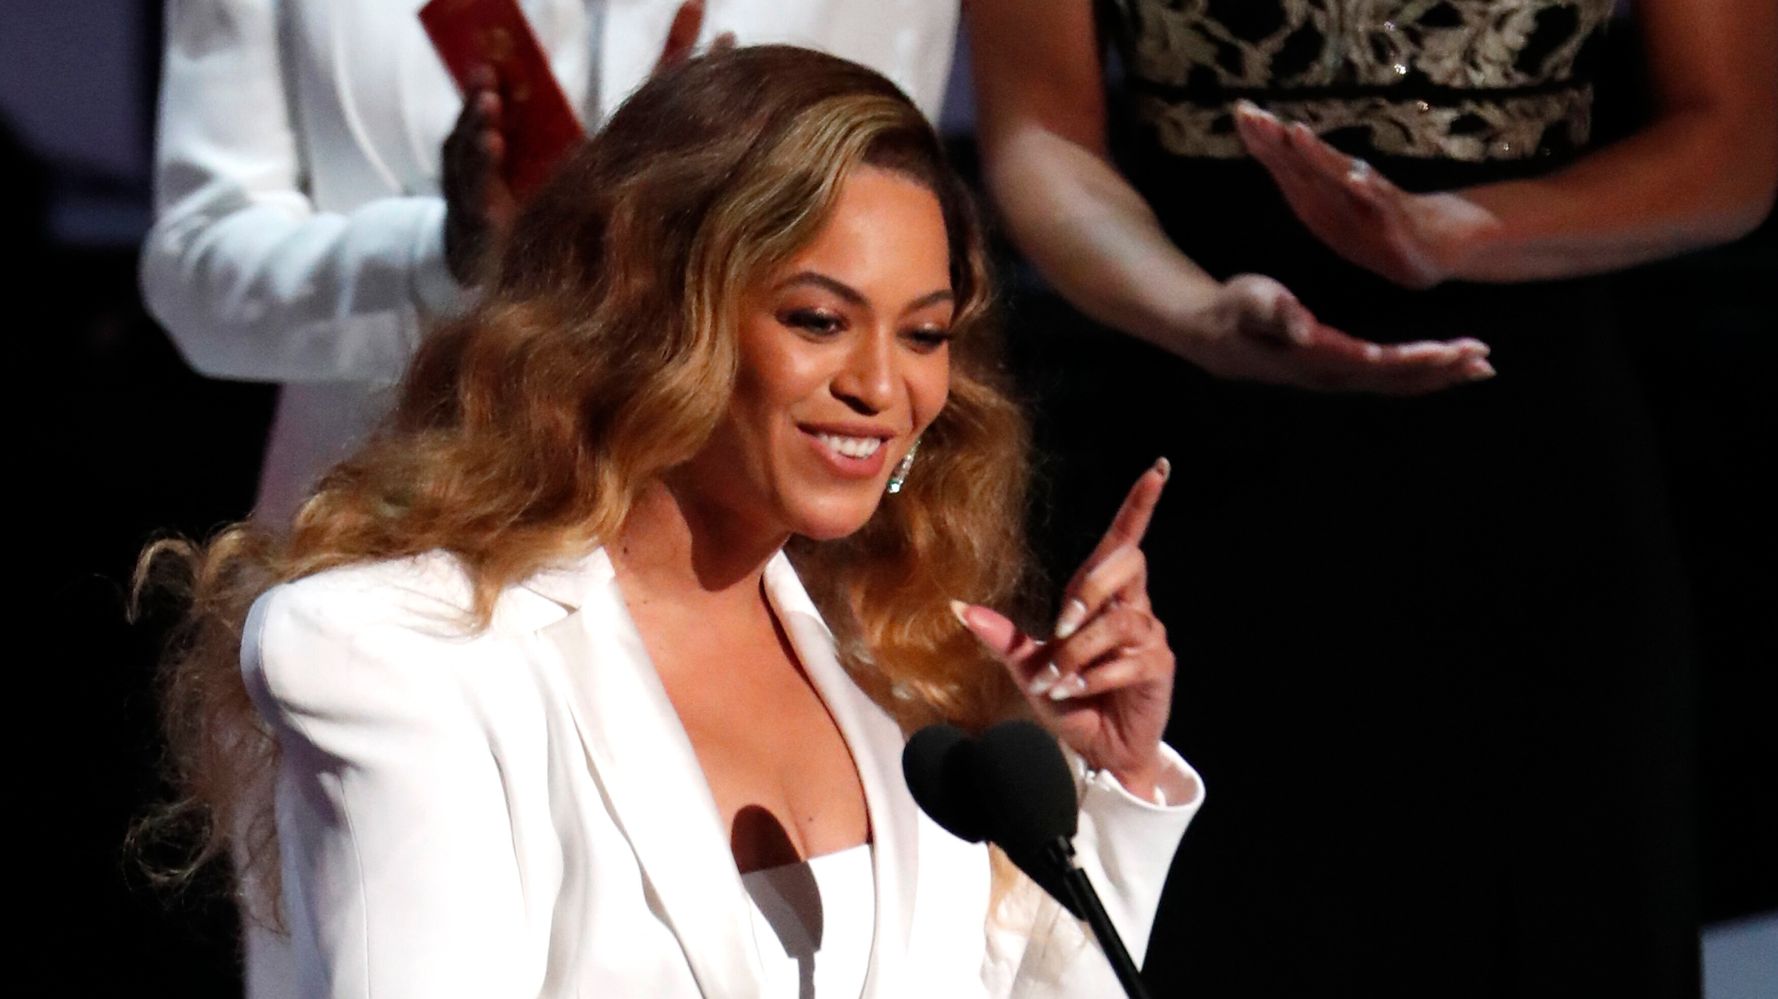 Beyoncé Explains Why She Can Come Across As 'Closed Off' To Fans